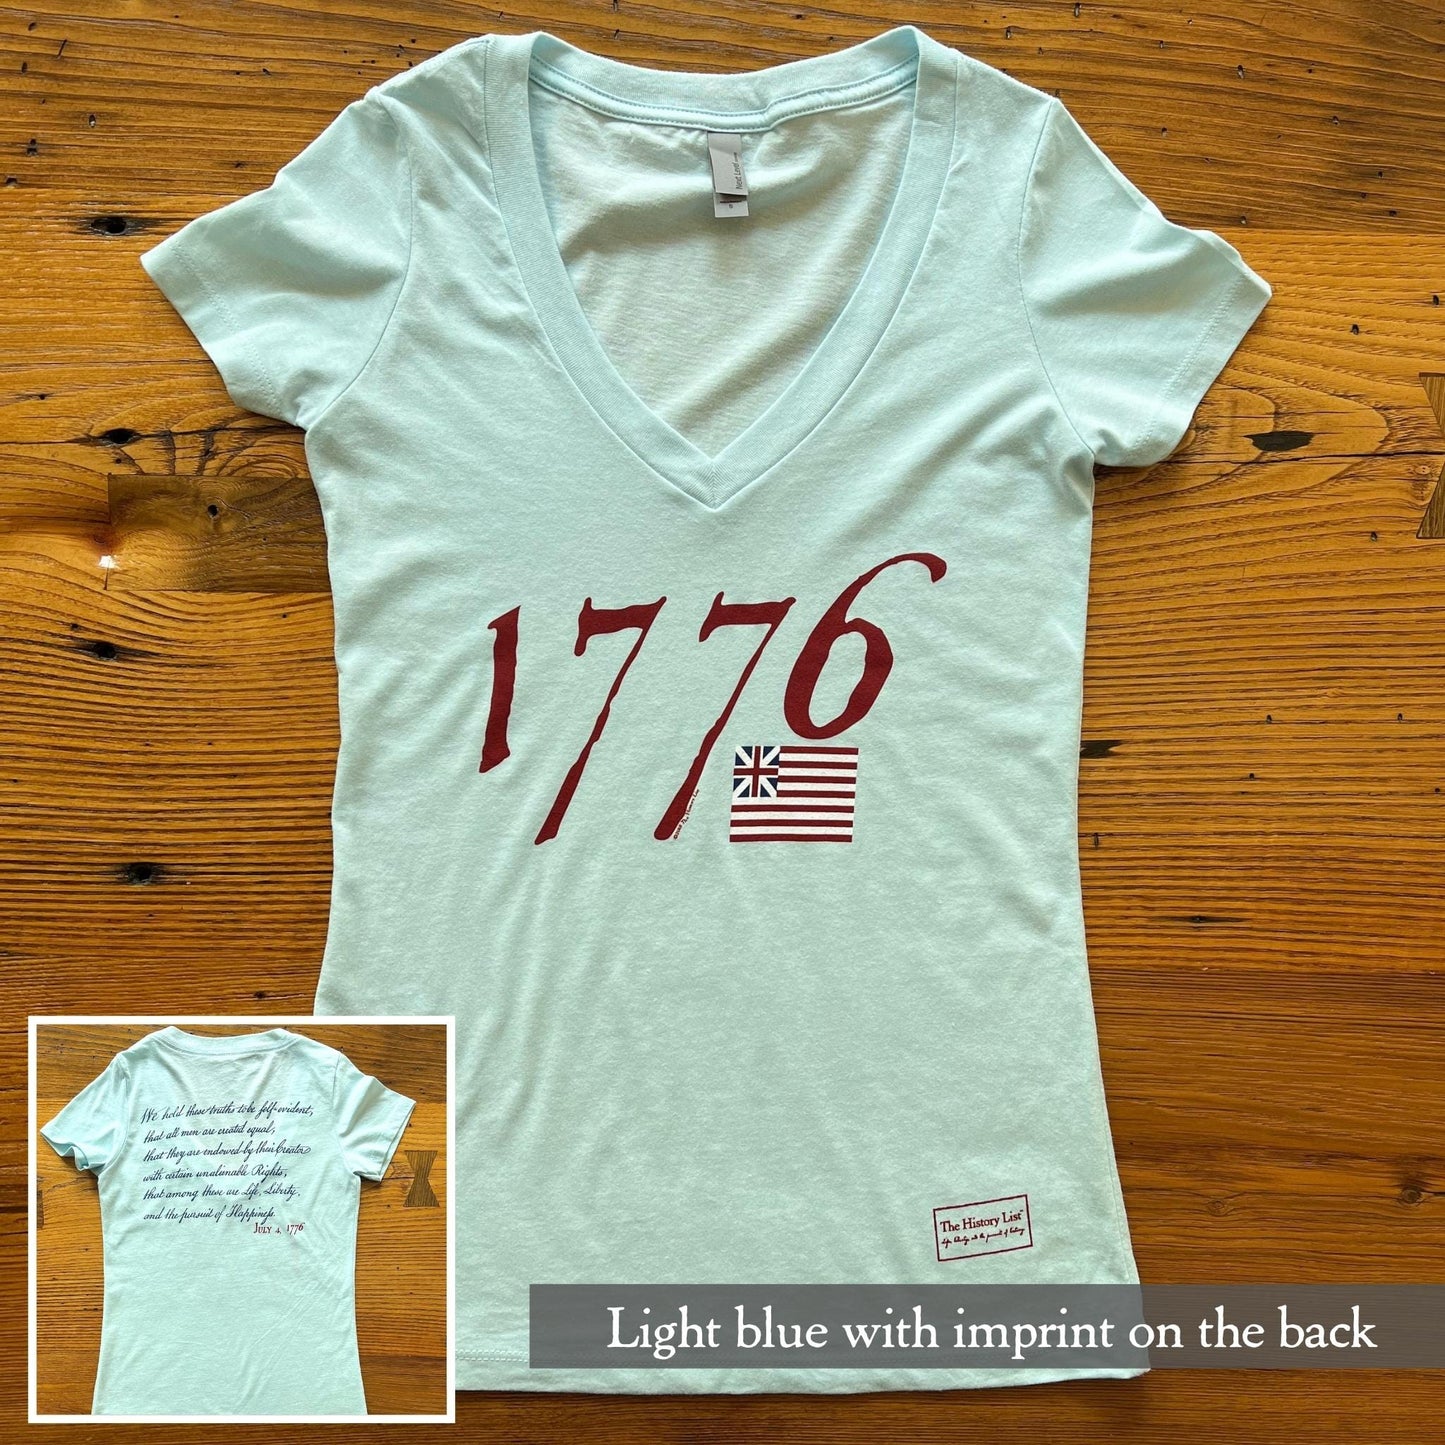 "We hold these truths - July 4, 1776” v-neck shirt from The History List store in Light blue with back imprint